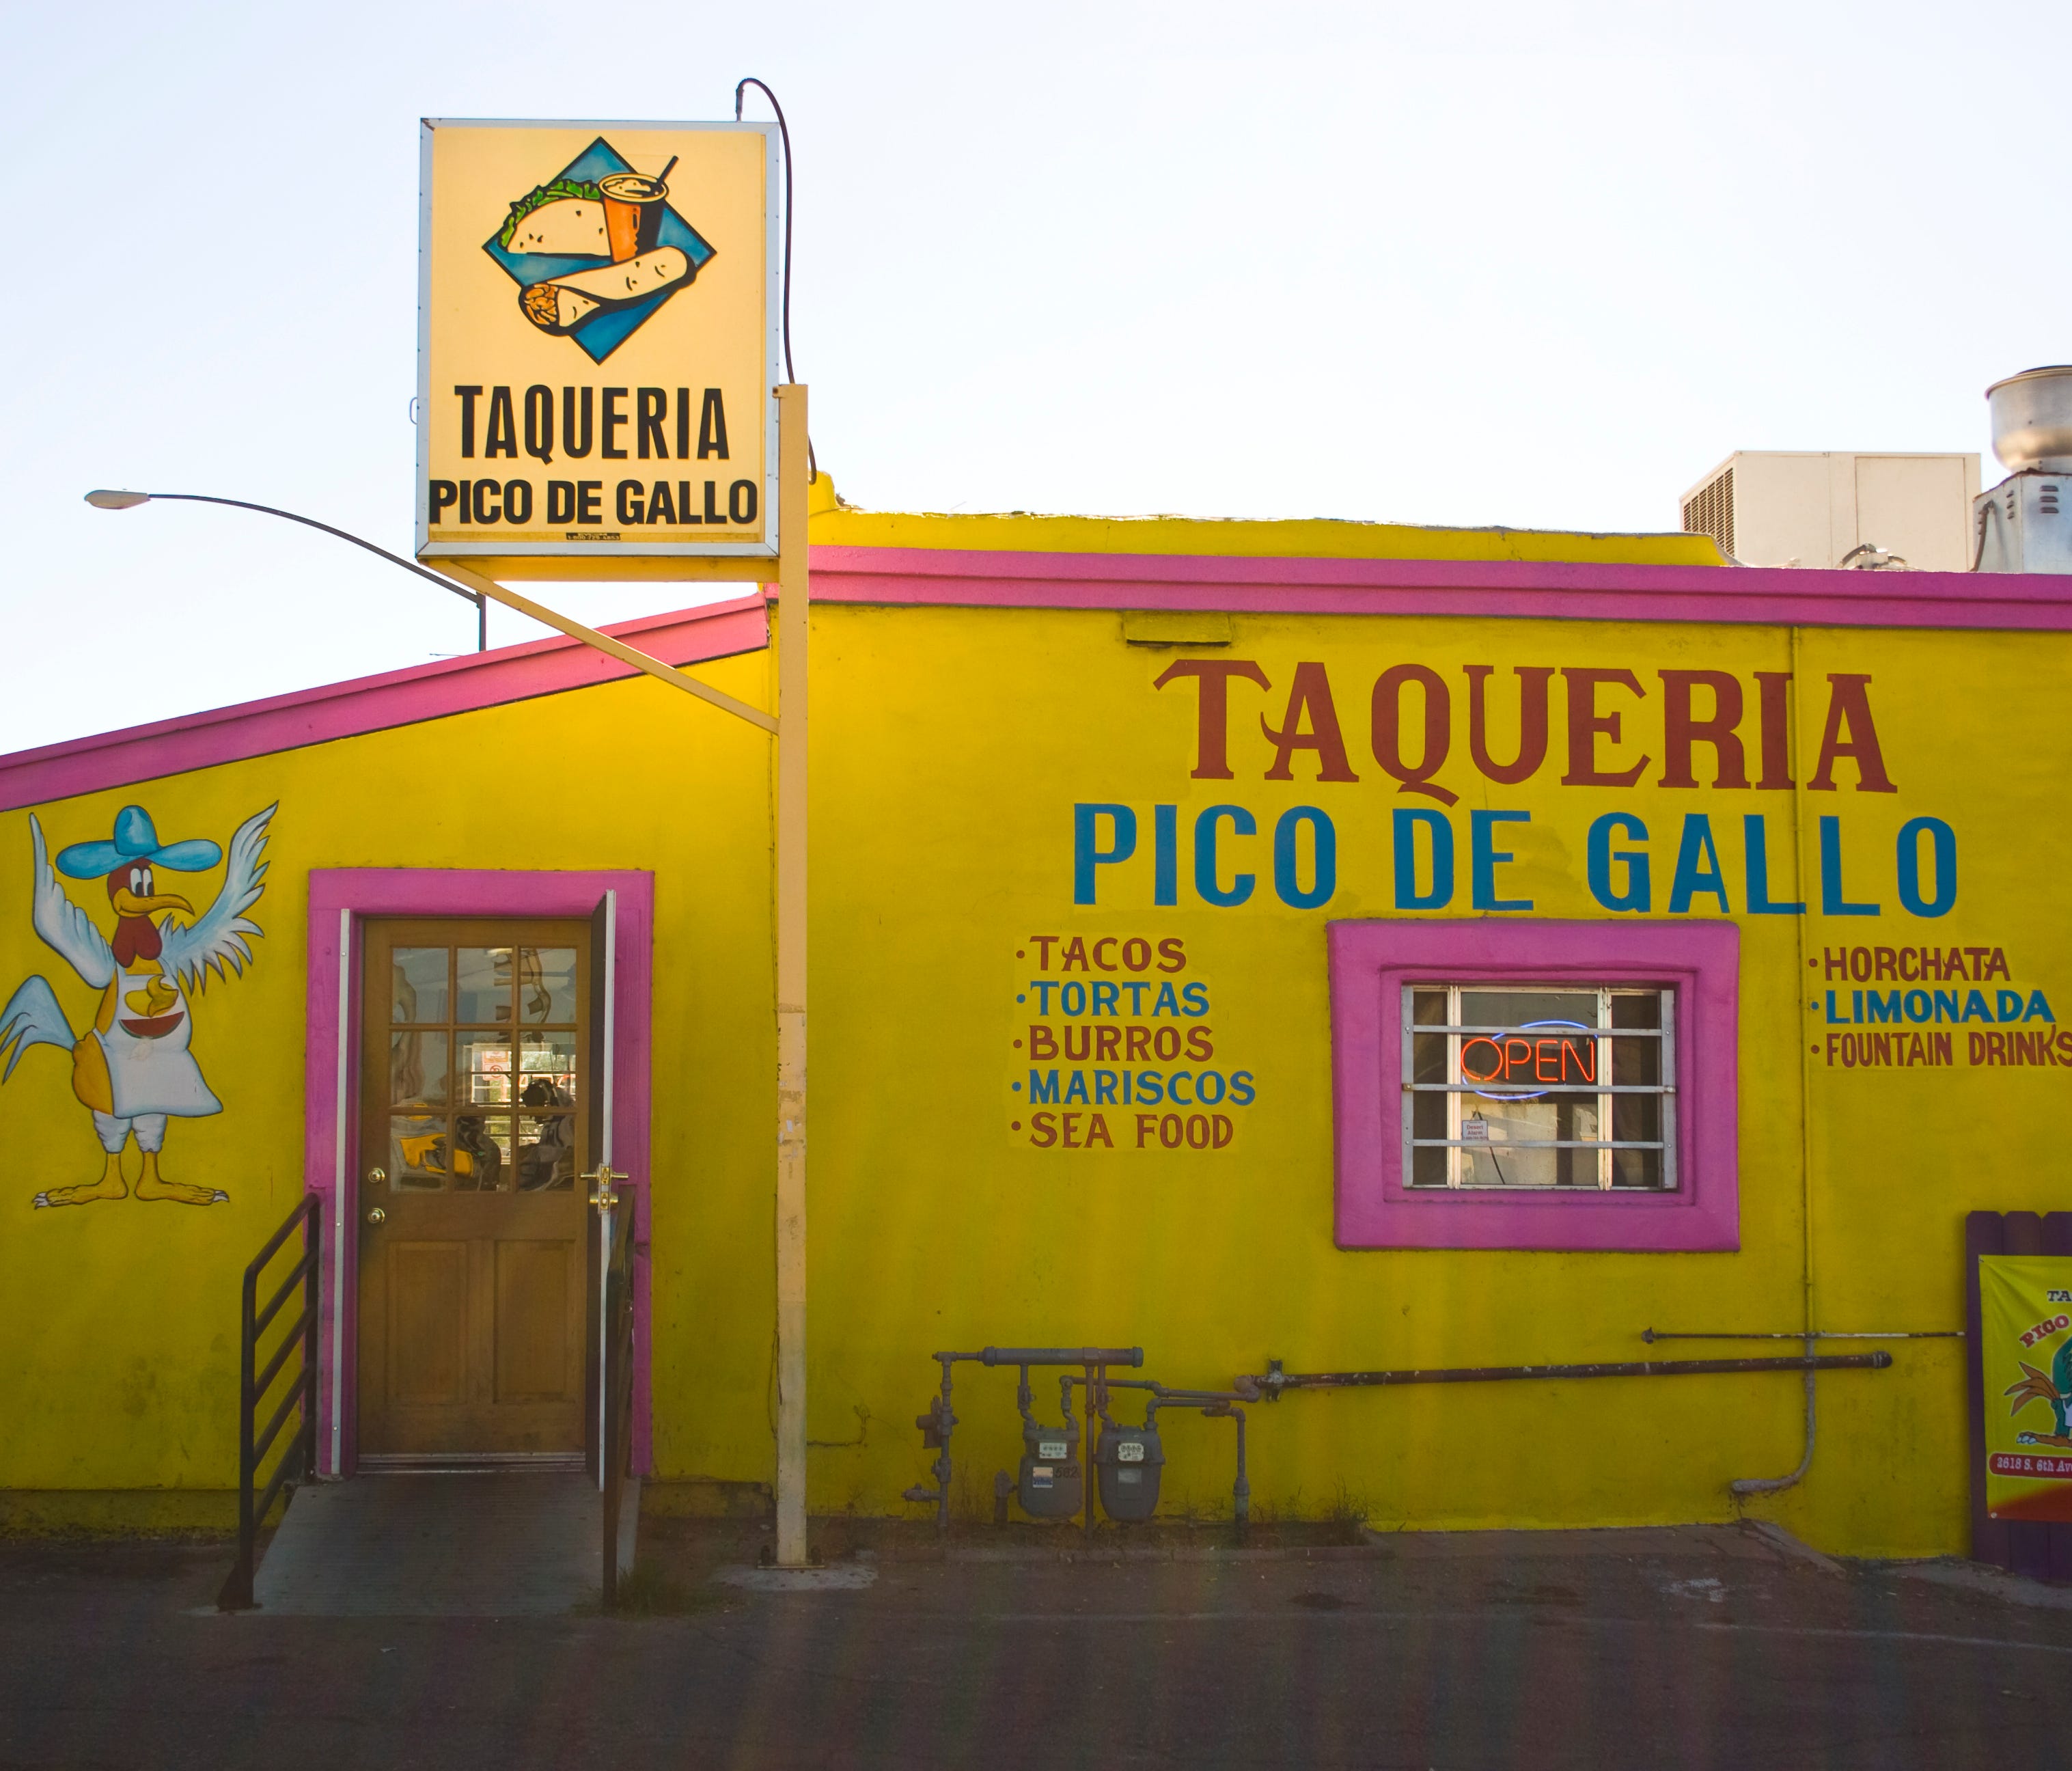 Tucson's Pico de Gallo has long been known for its tacos with corn tortillas.